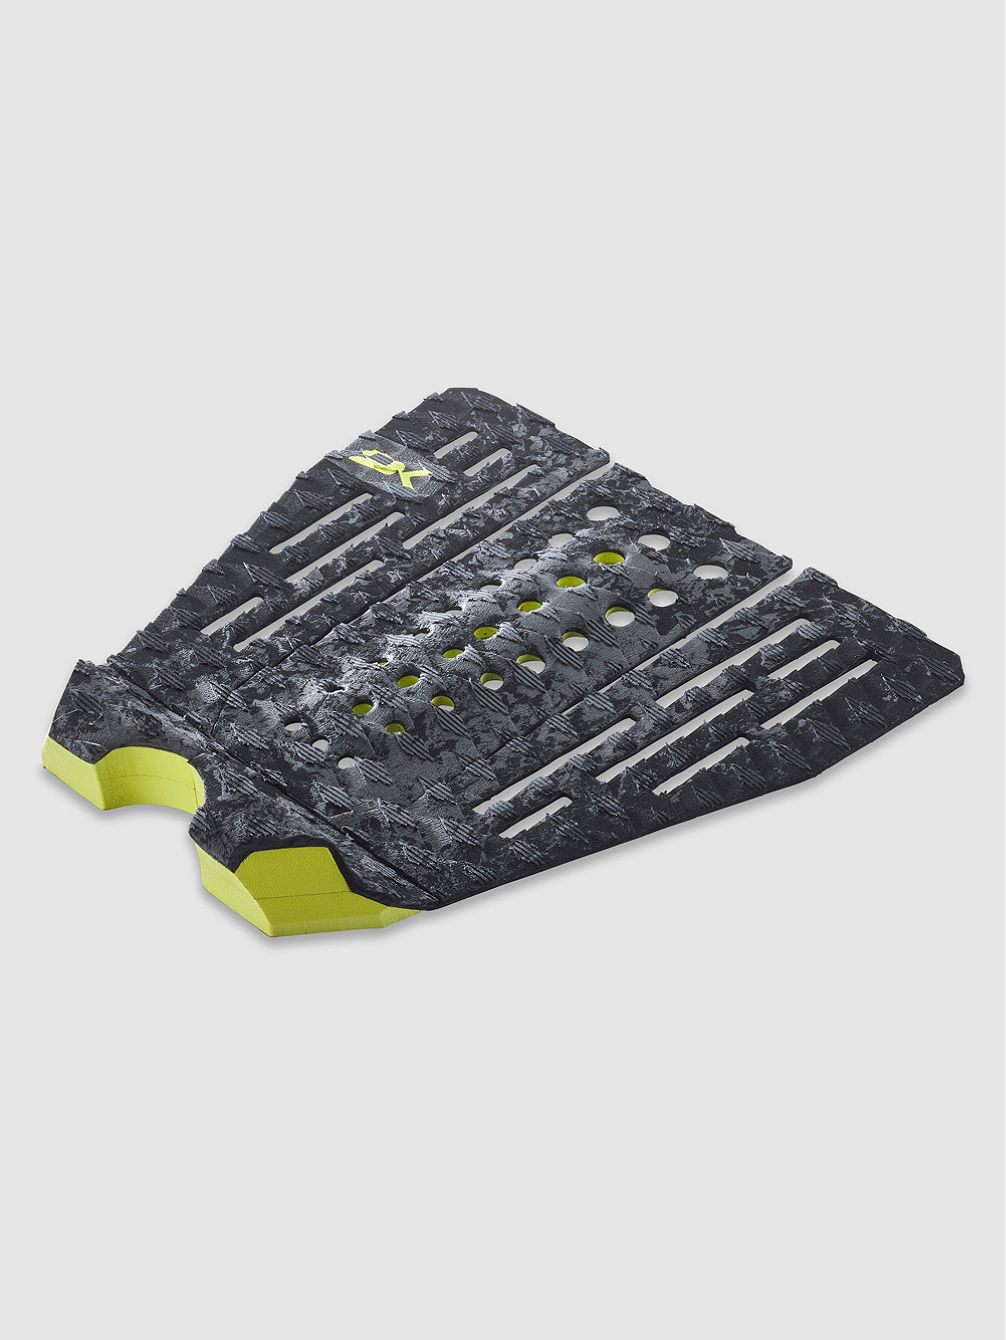 Evade Surf Traction Tailpad